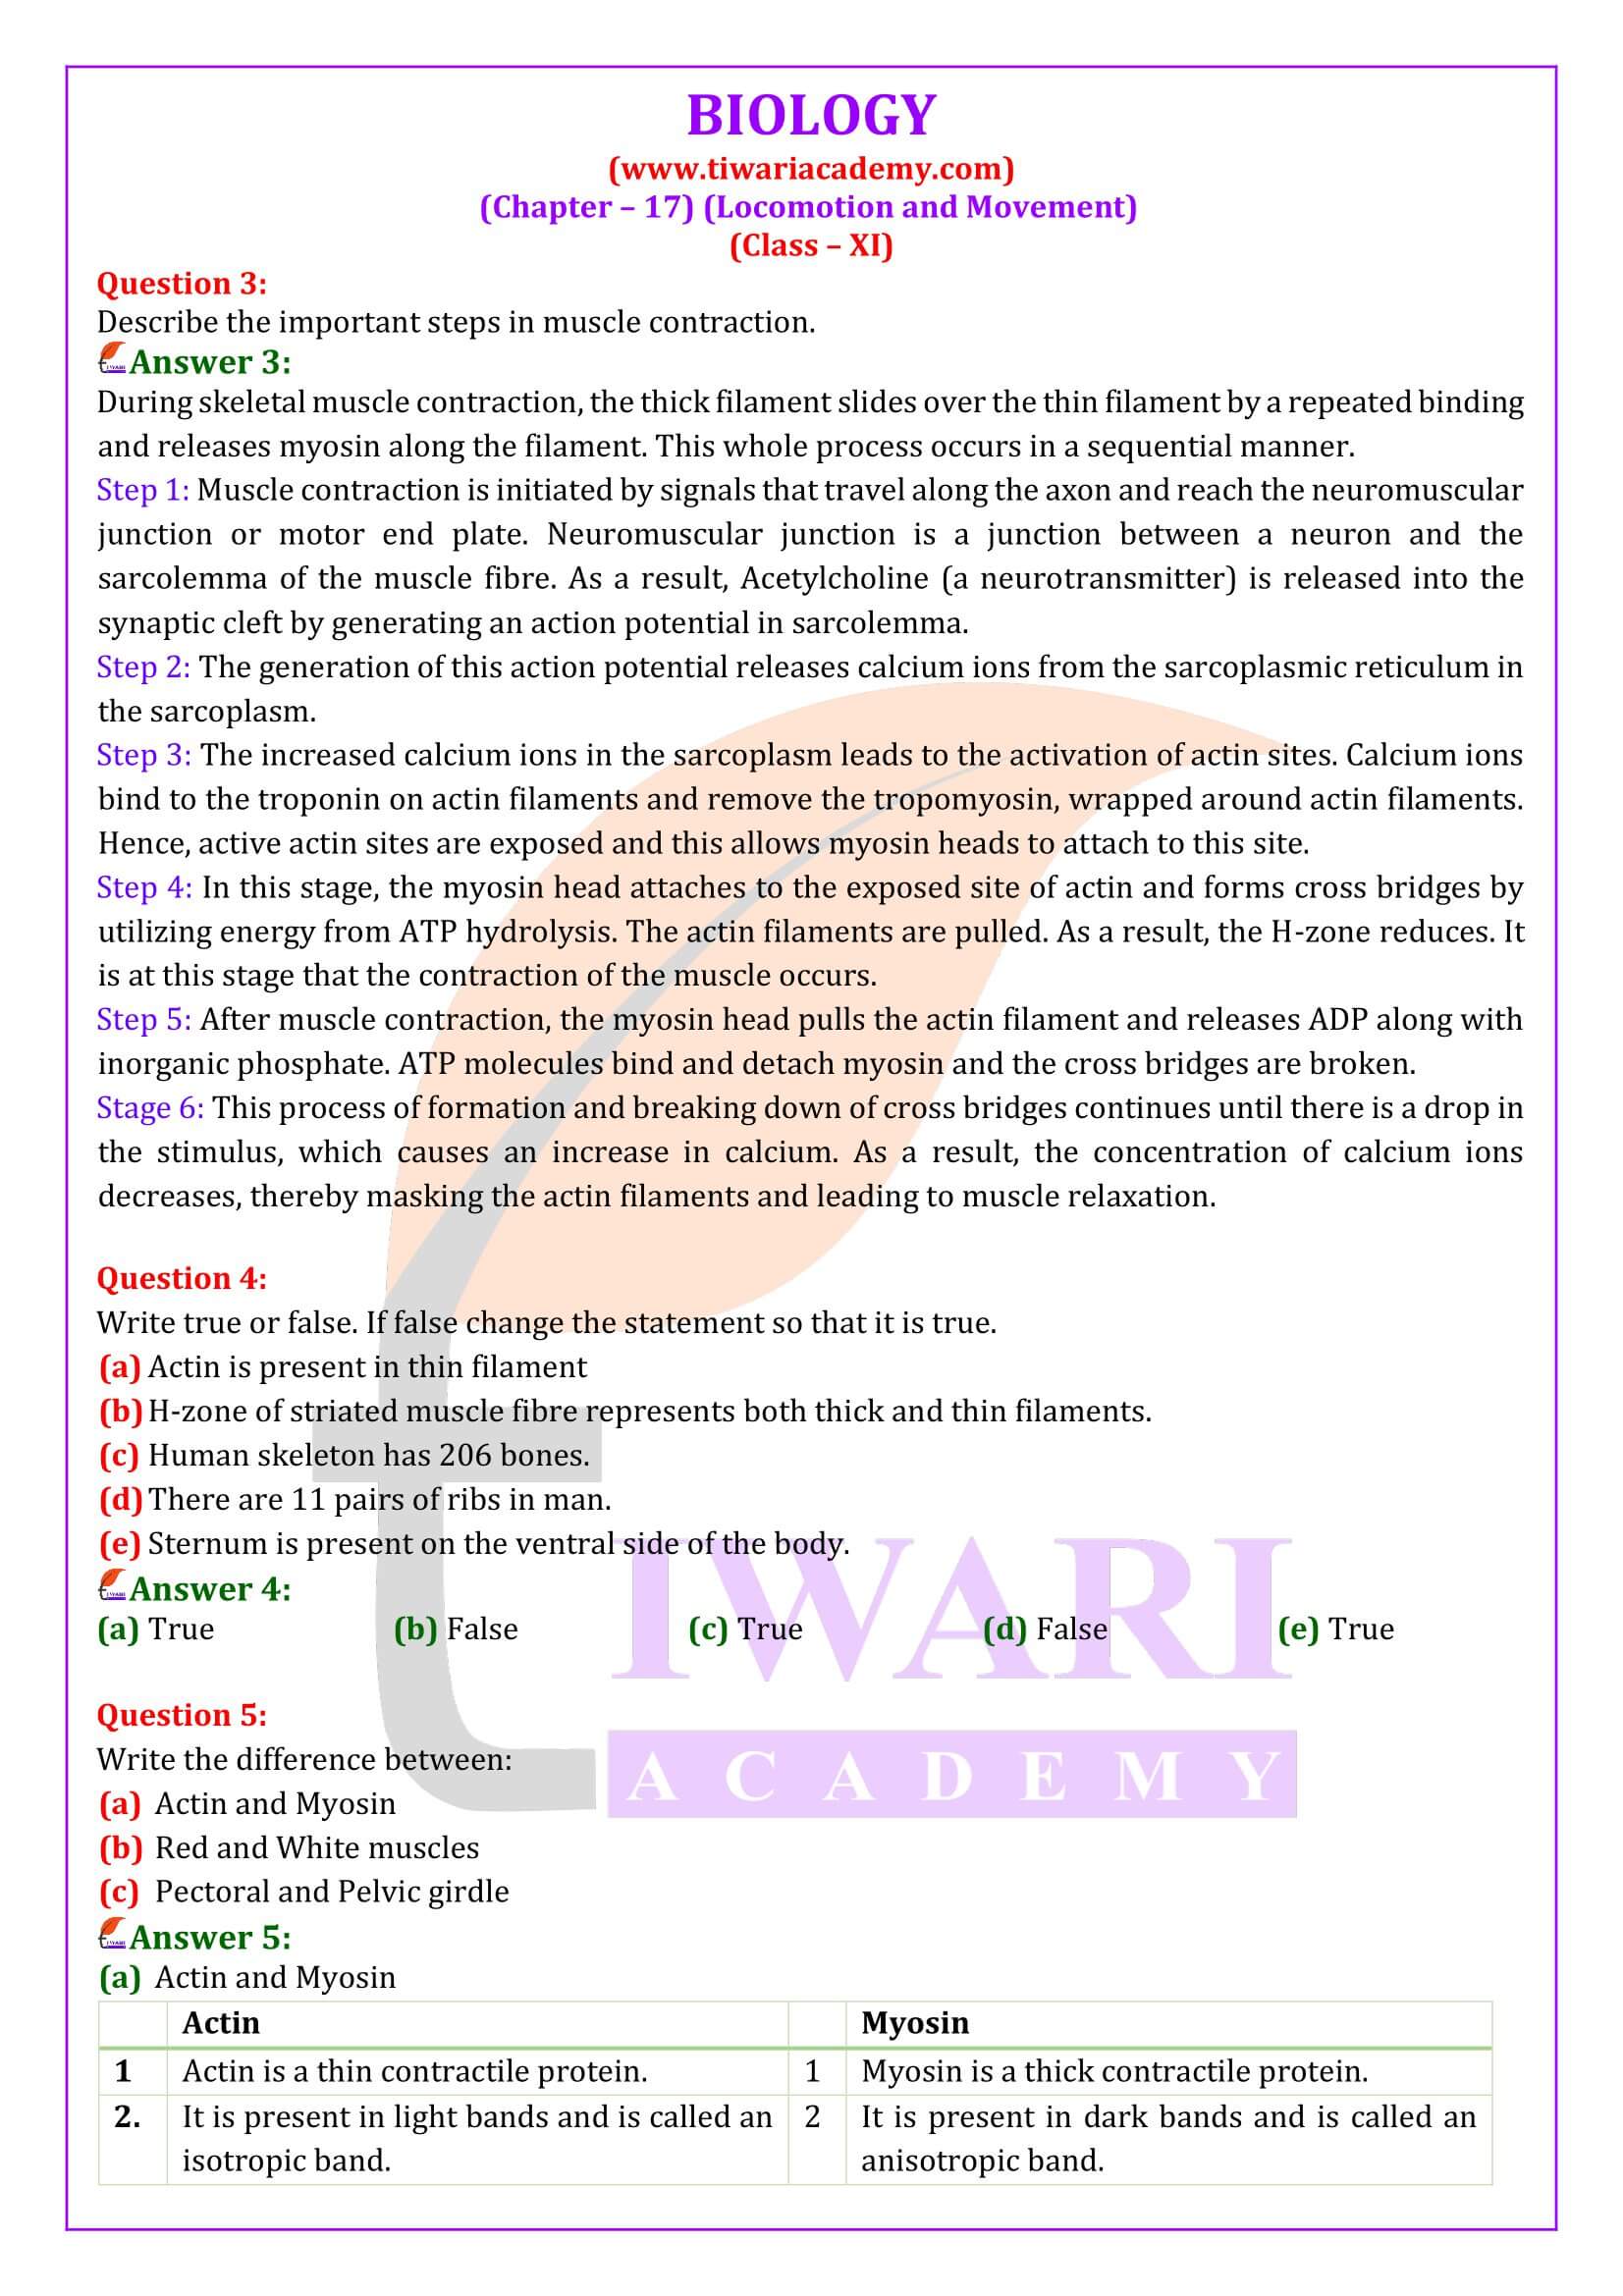 NCERT Solutions for Class 11 Biology Chapter 17